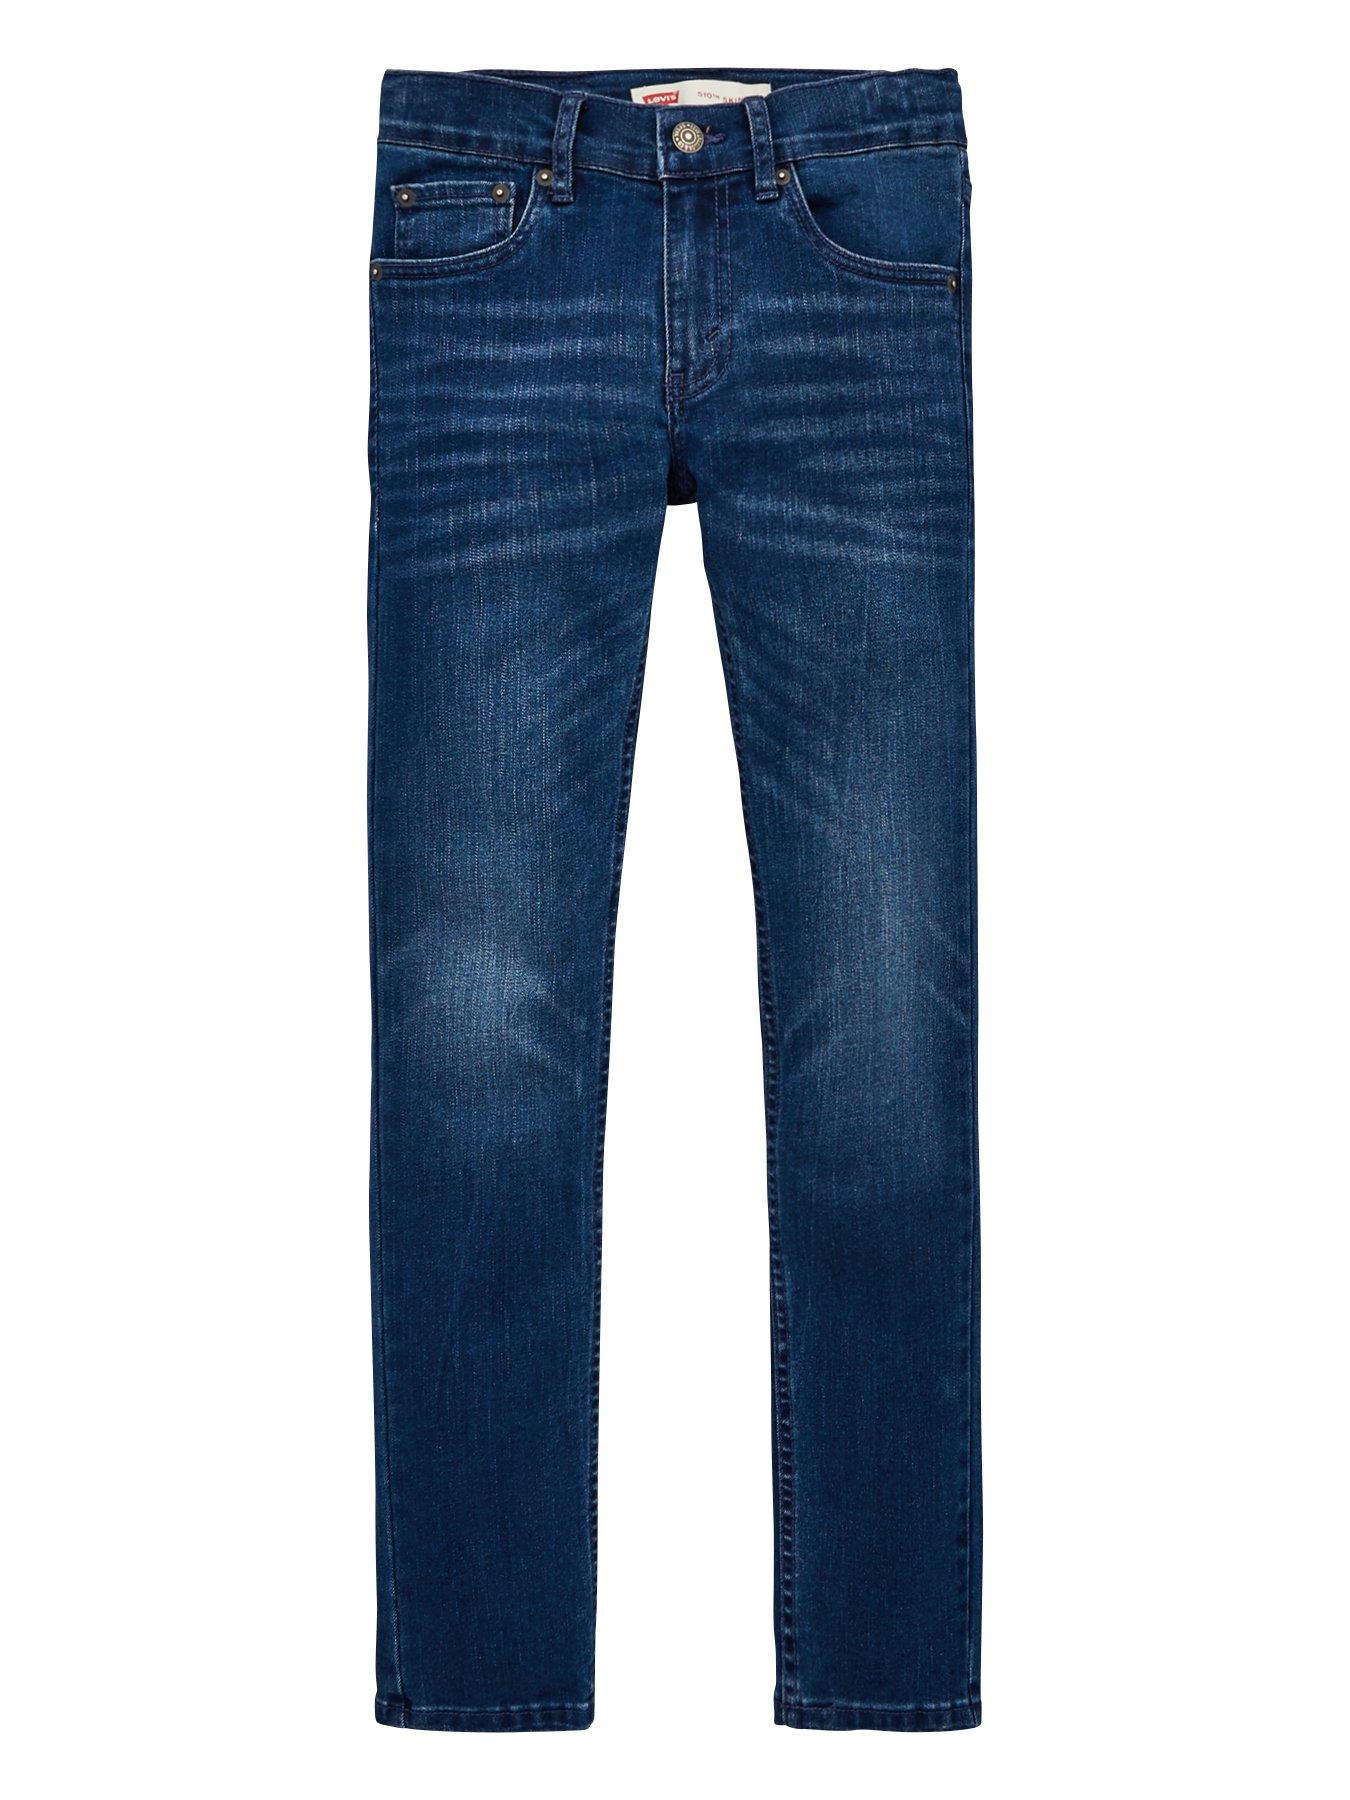 Levi's Boys 510 Skinny Fit Jeans - Mid Wash | very.co.uk